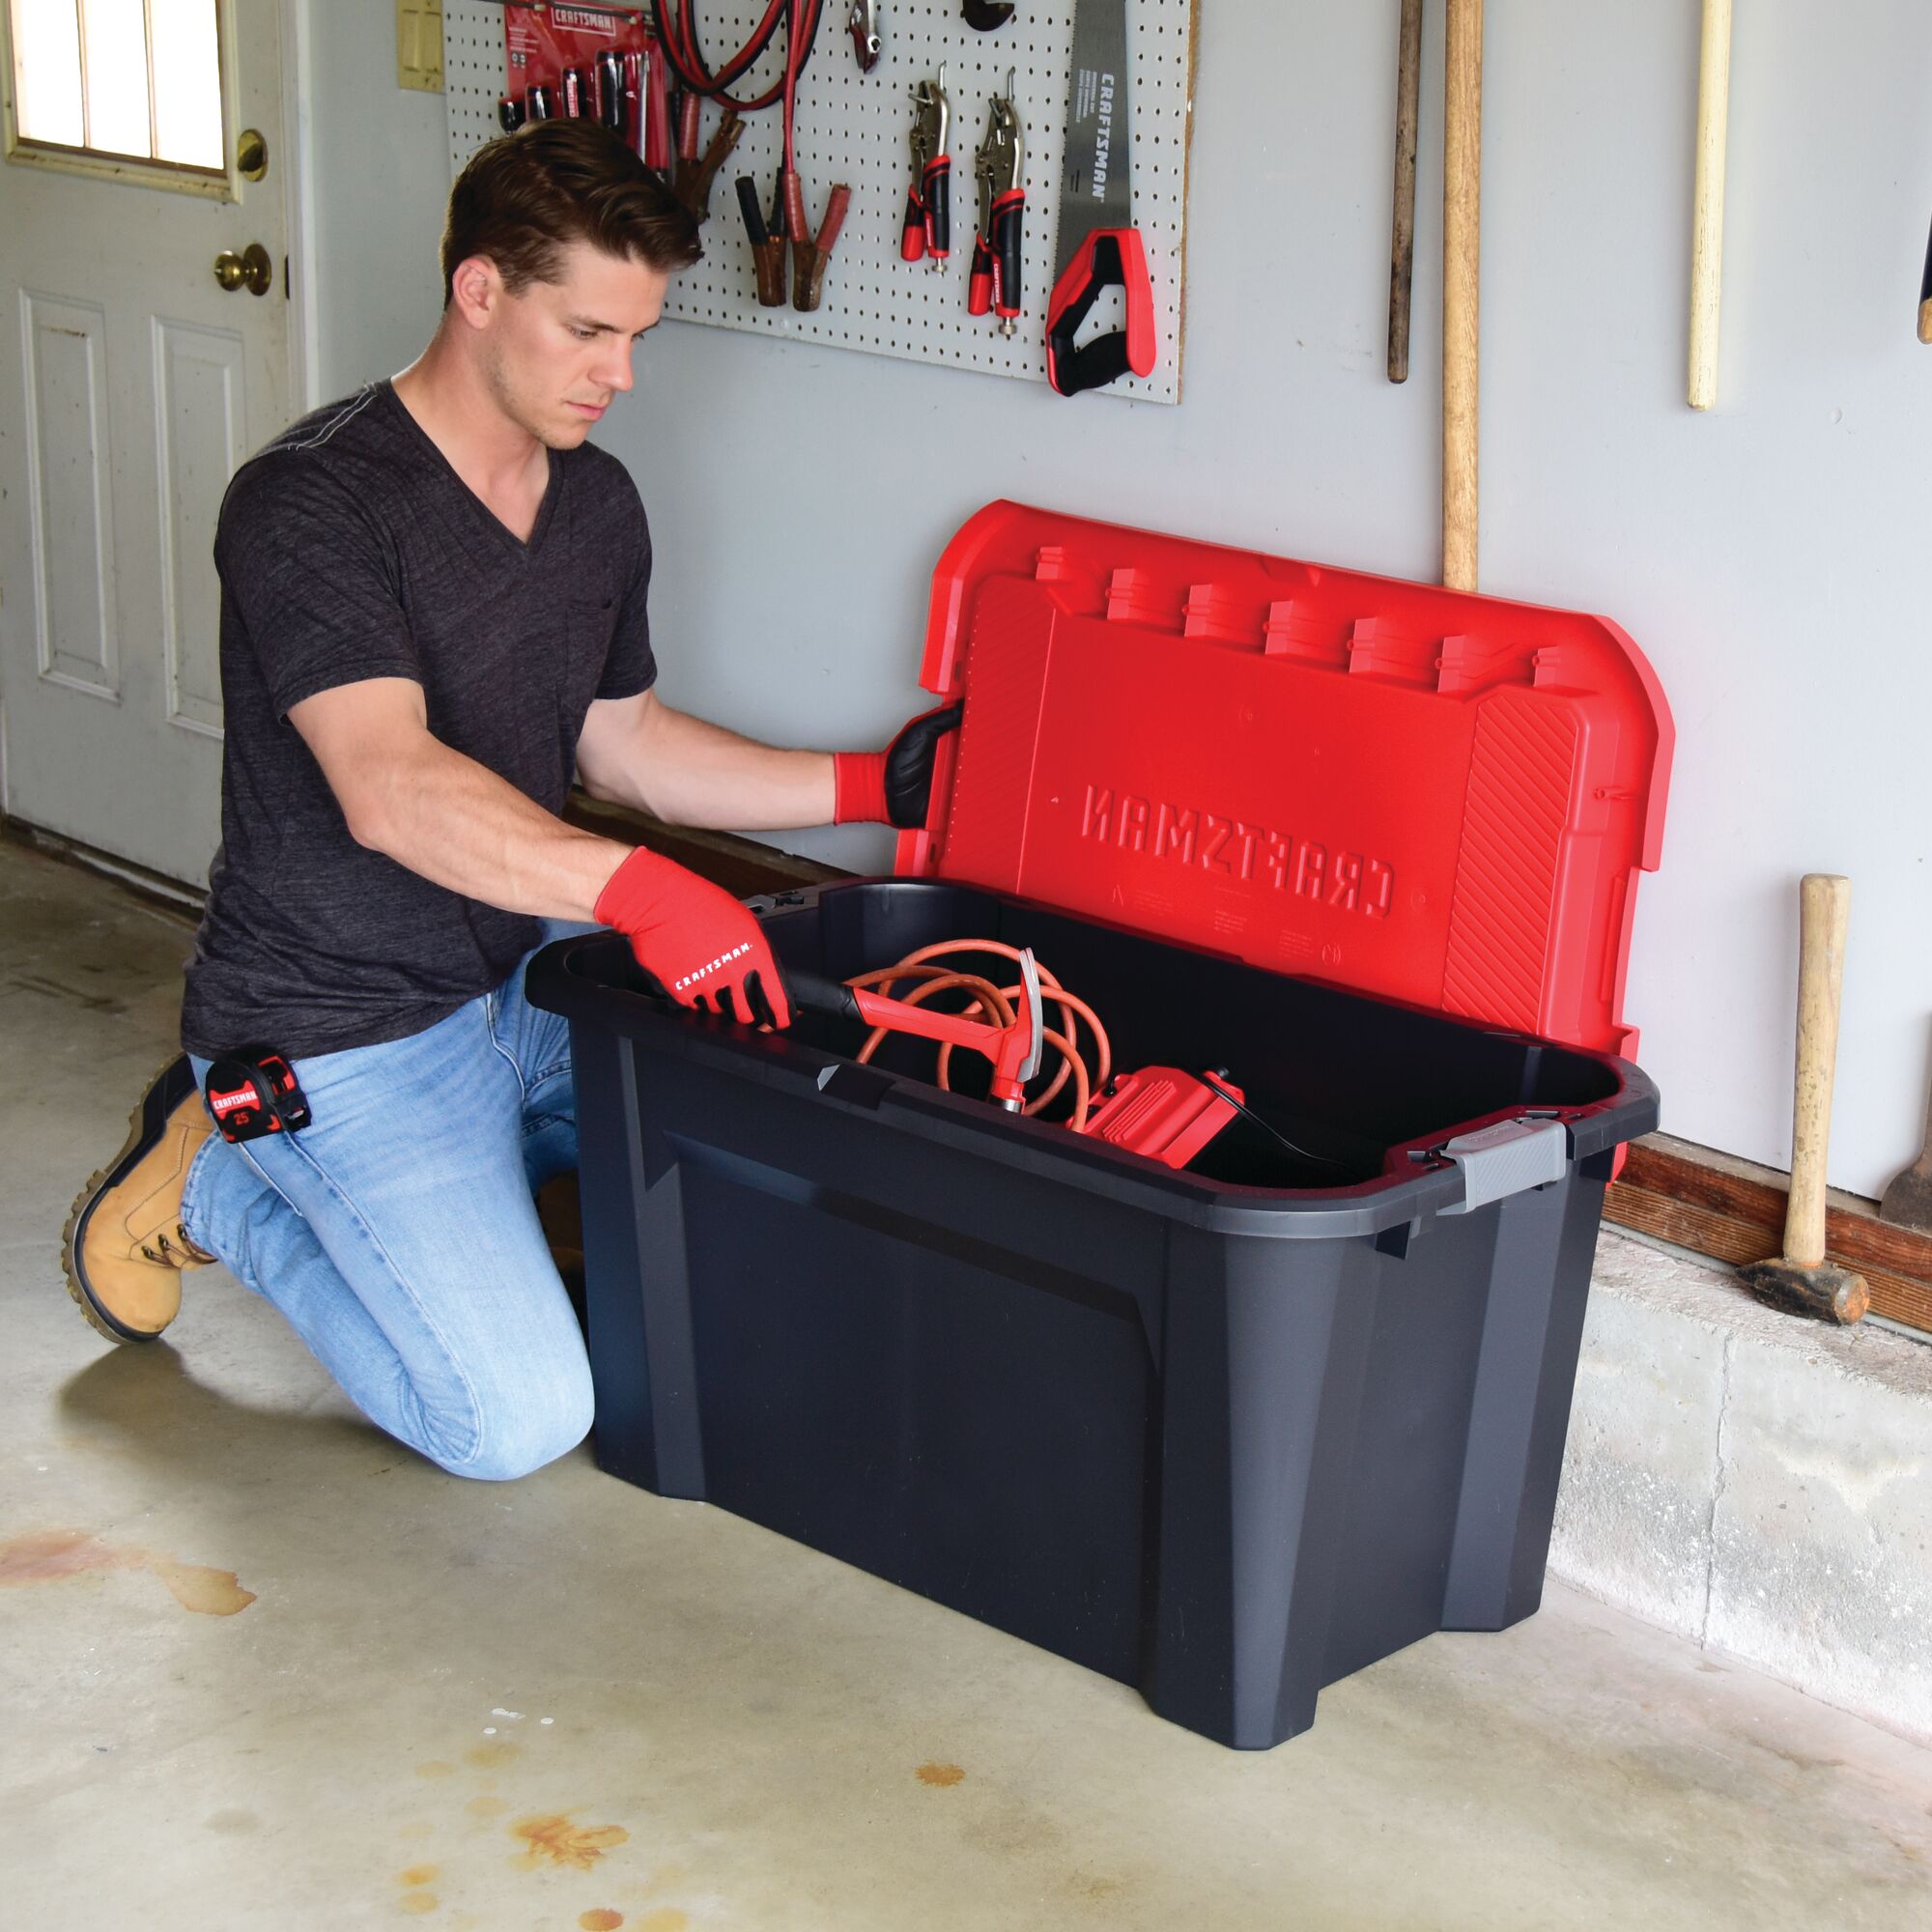 40 Gallon latching tote being used by a person to store tools.